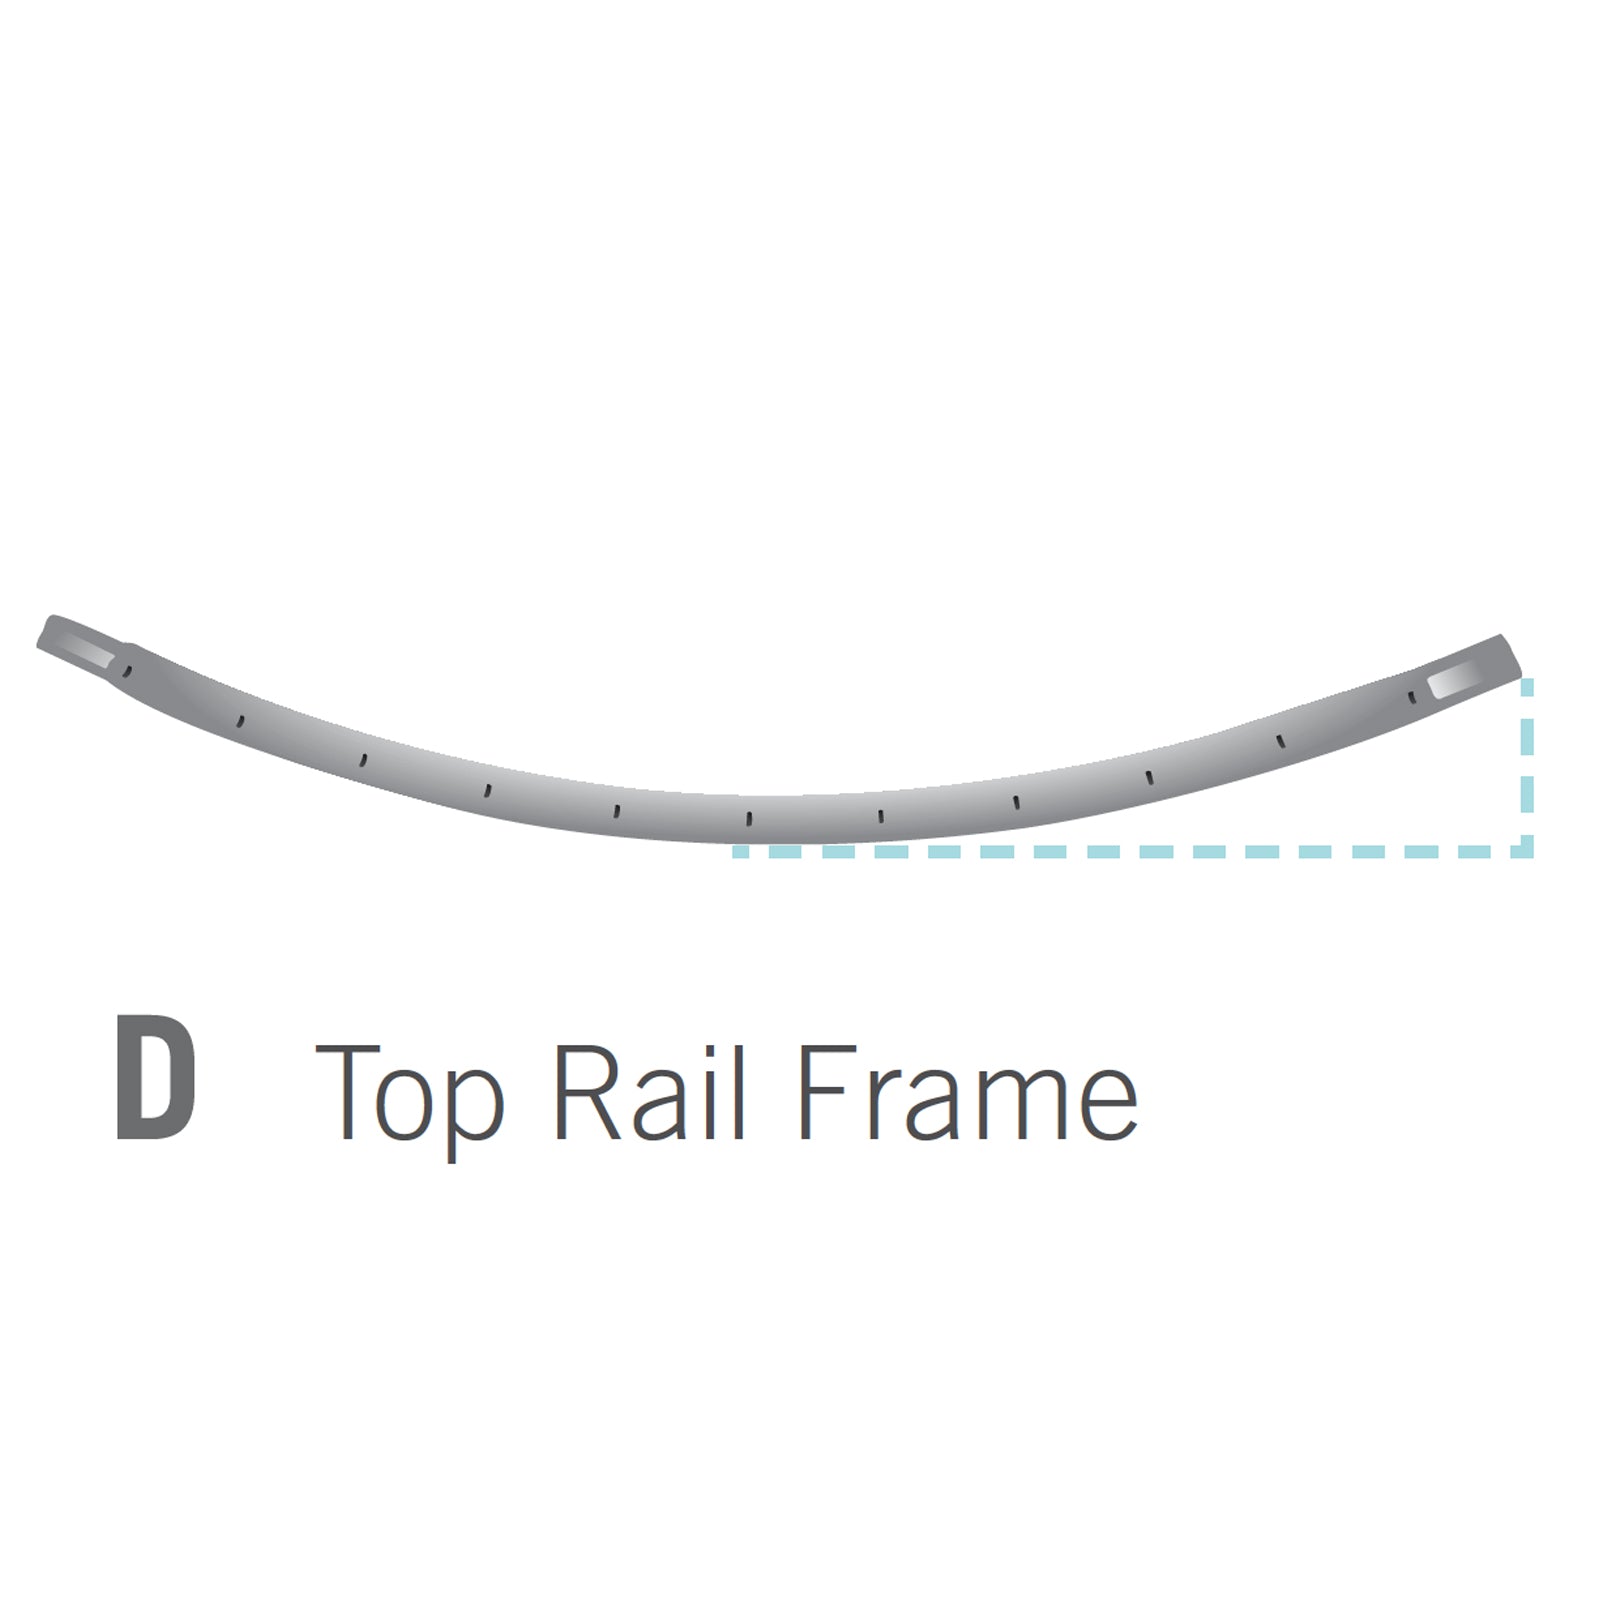 Top Rail for 11x16 foot Orion Trampoline (Part D).